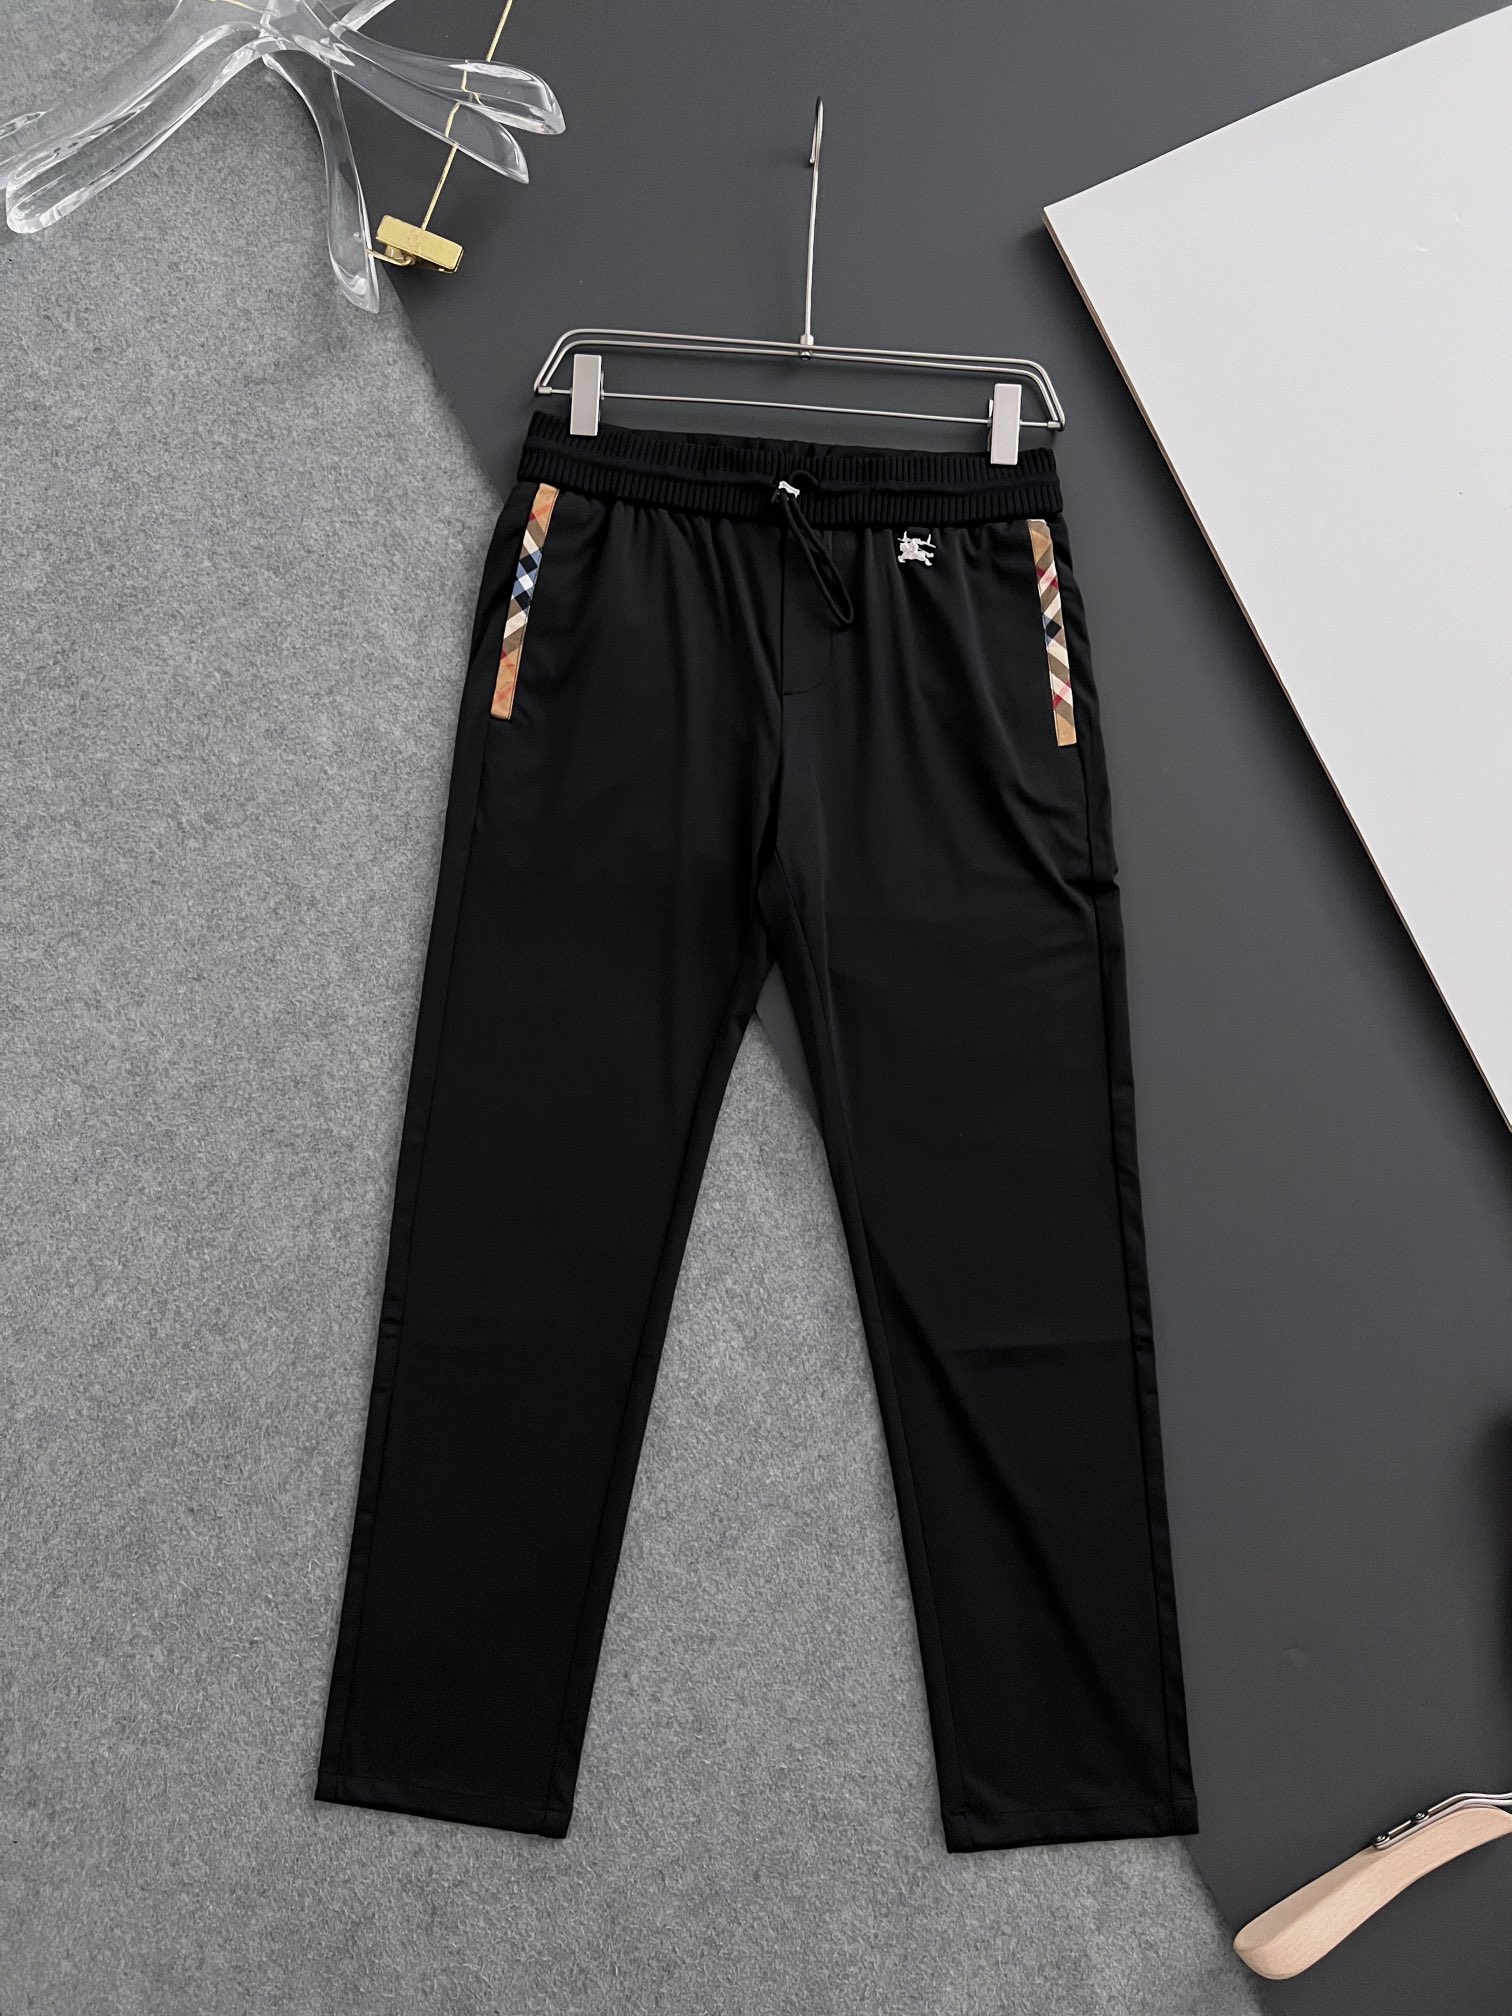 Burberry Clothing Pants & Trousers Black Yellow Splicing Men Cotton Stretch Spring/Summer Collection Fashion Casual